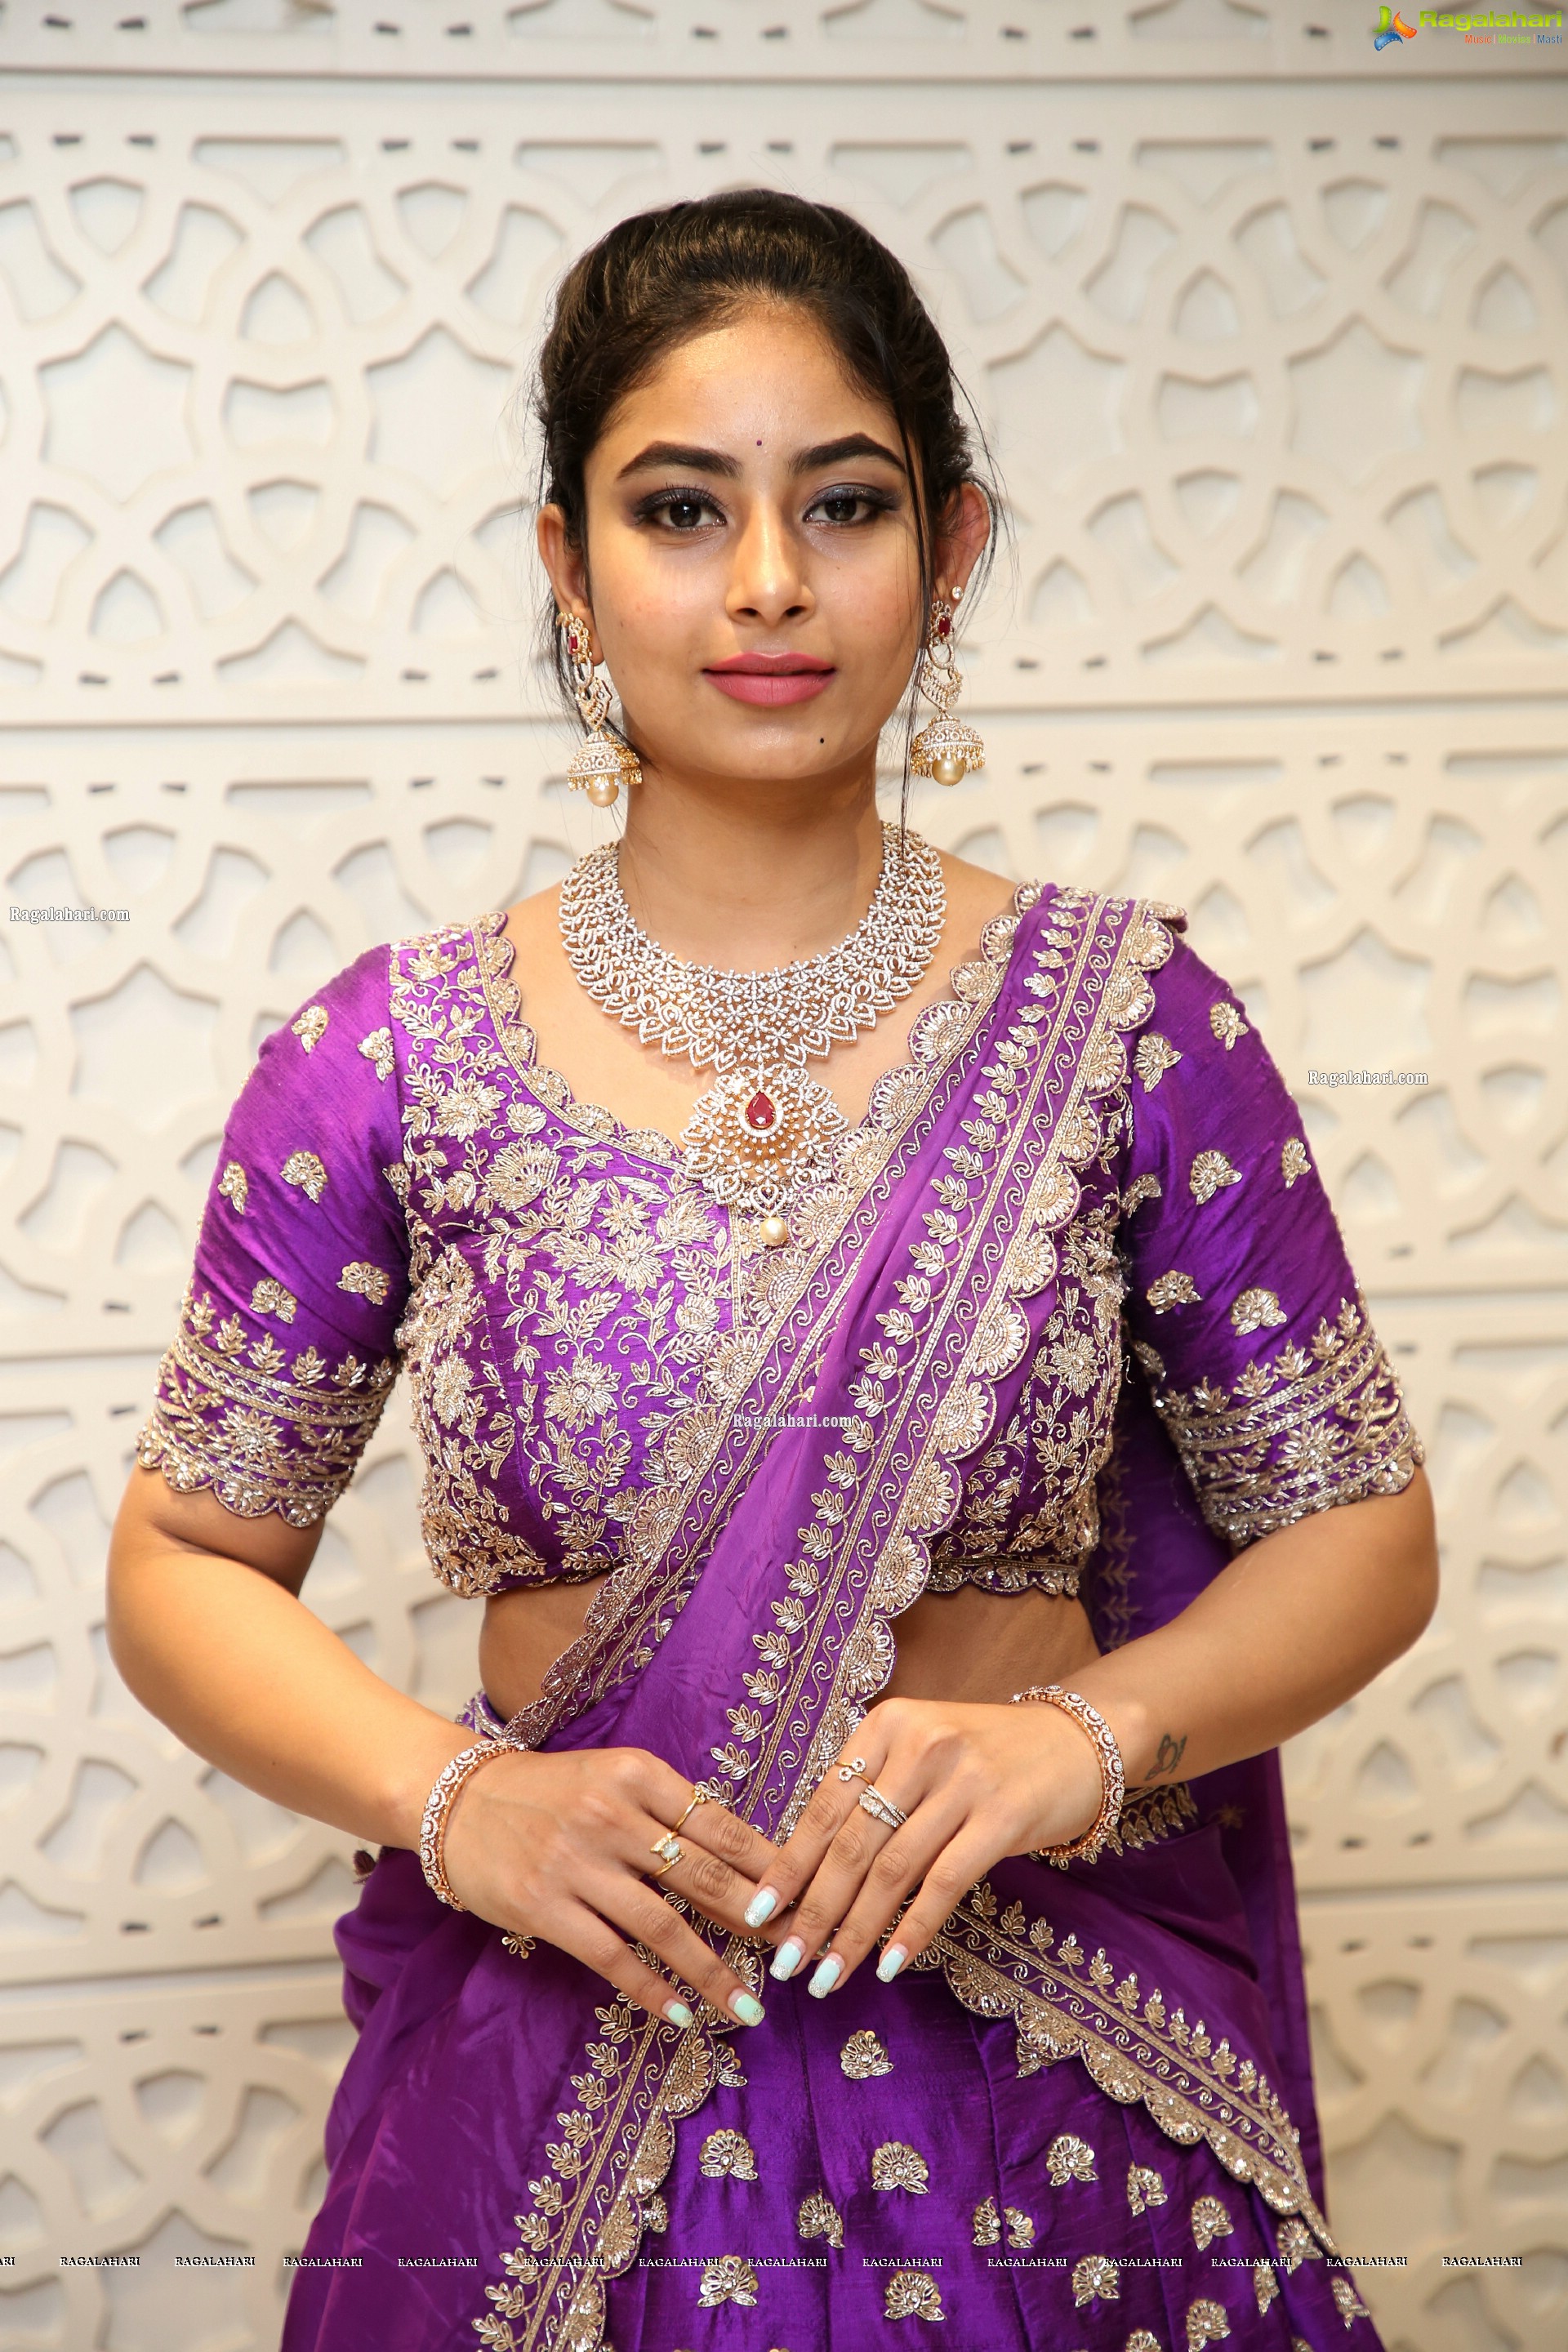 Honey Chowdary in Traditional Jewellery, HD Photo Gallery